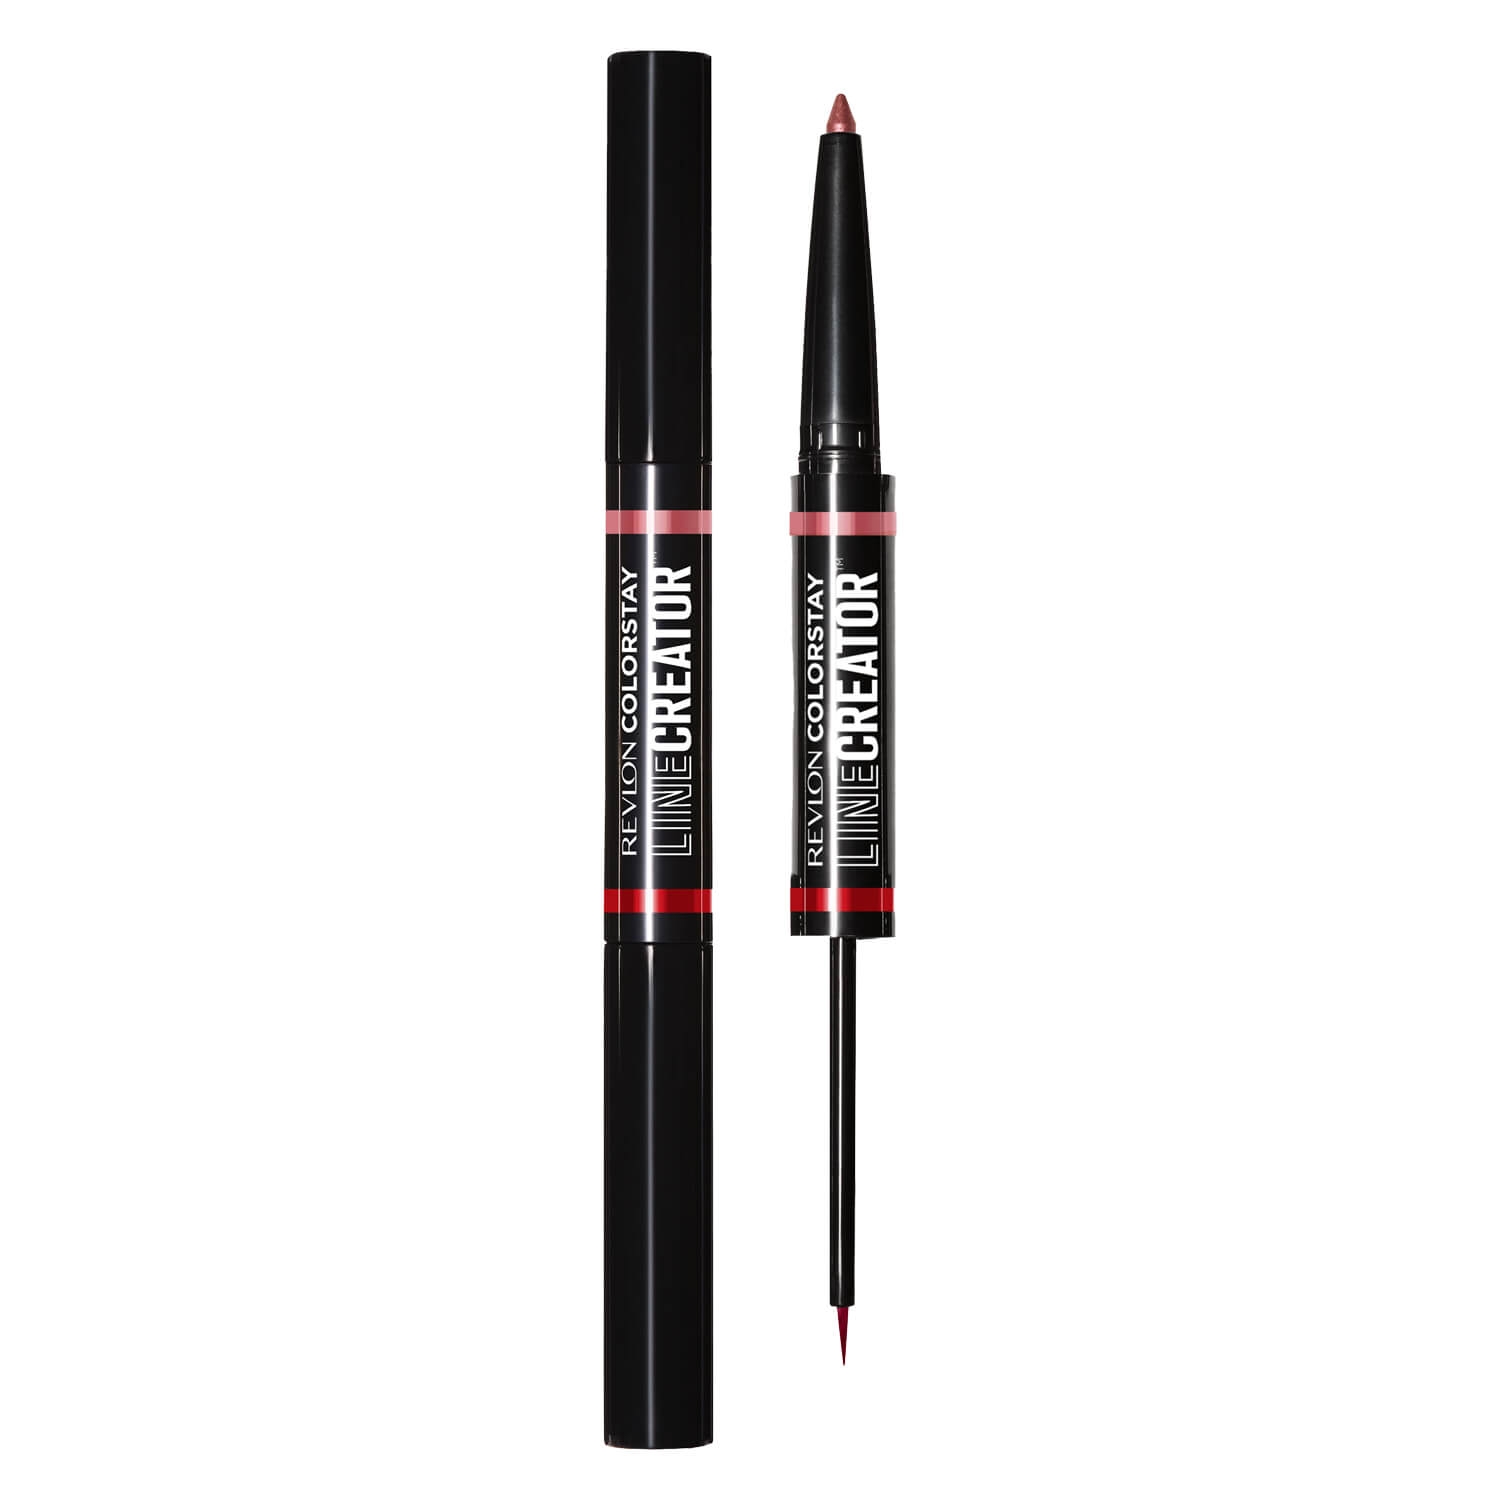 Produktbild von Colorstay Line Creator Double Ended Liner She's on fire